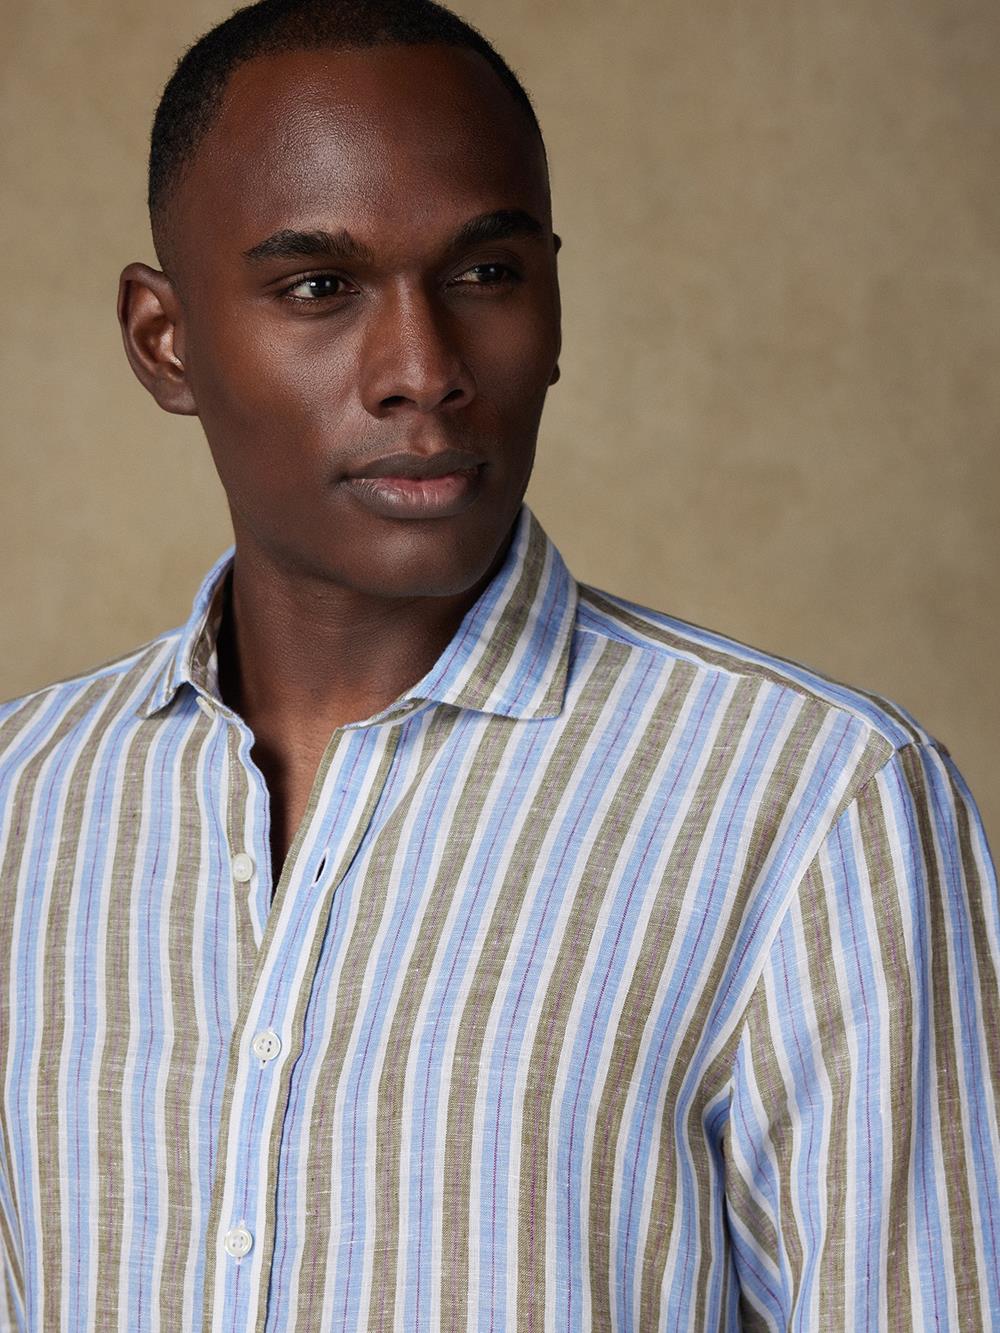 Robby shirt in linen with stripes 